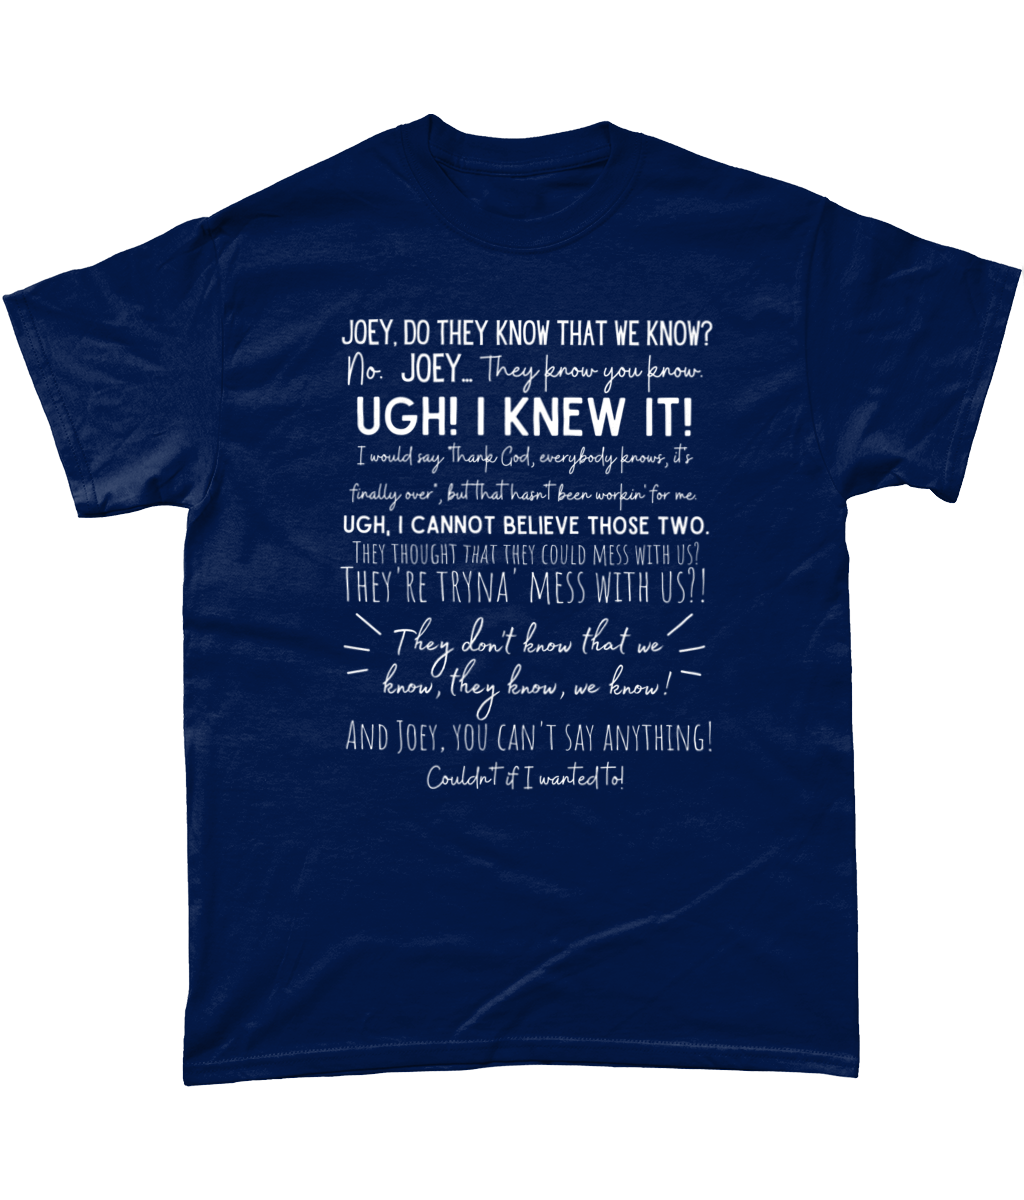 They Don't Know That We Know They Know T-Shirt